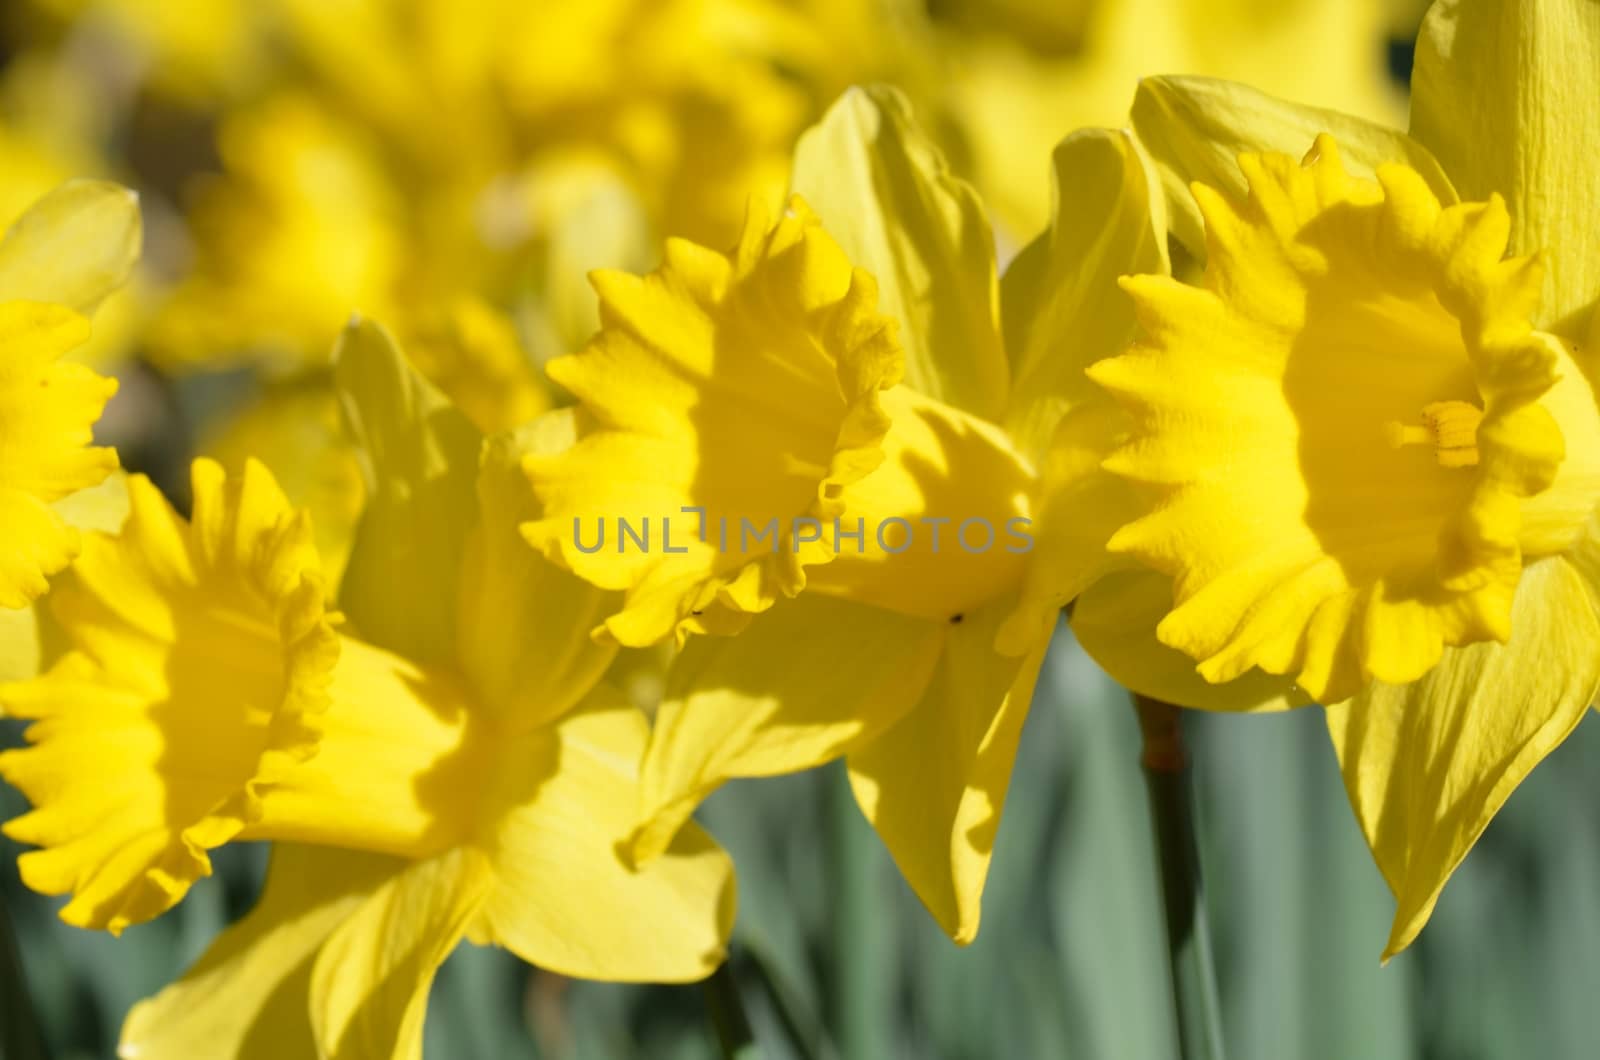 Small group of daffodils up close